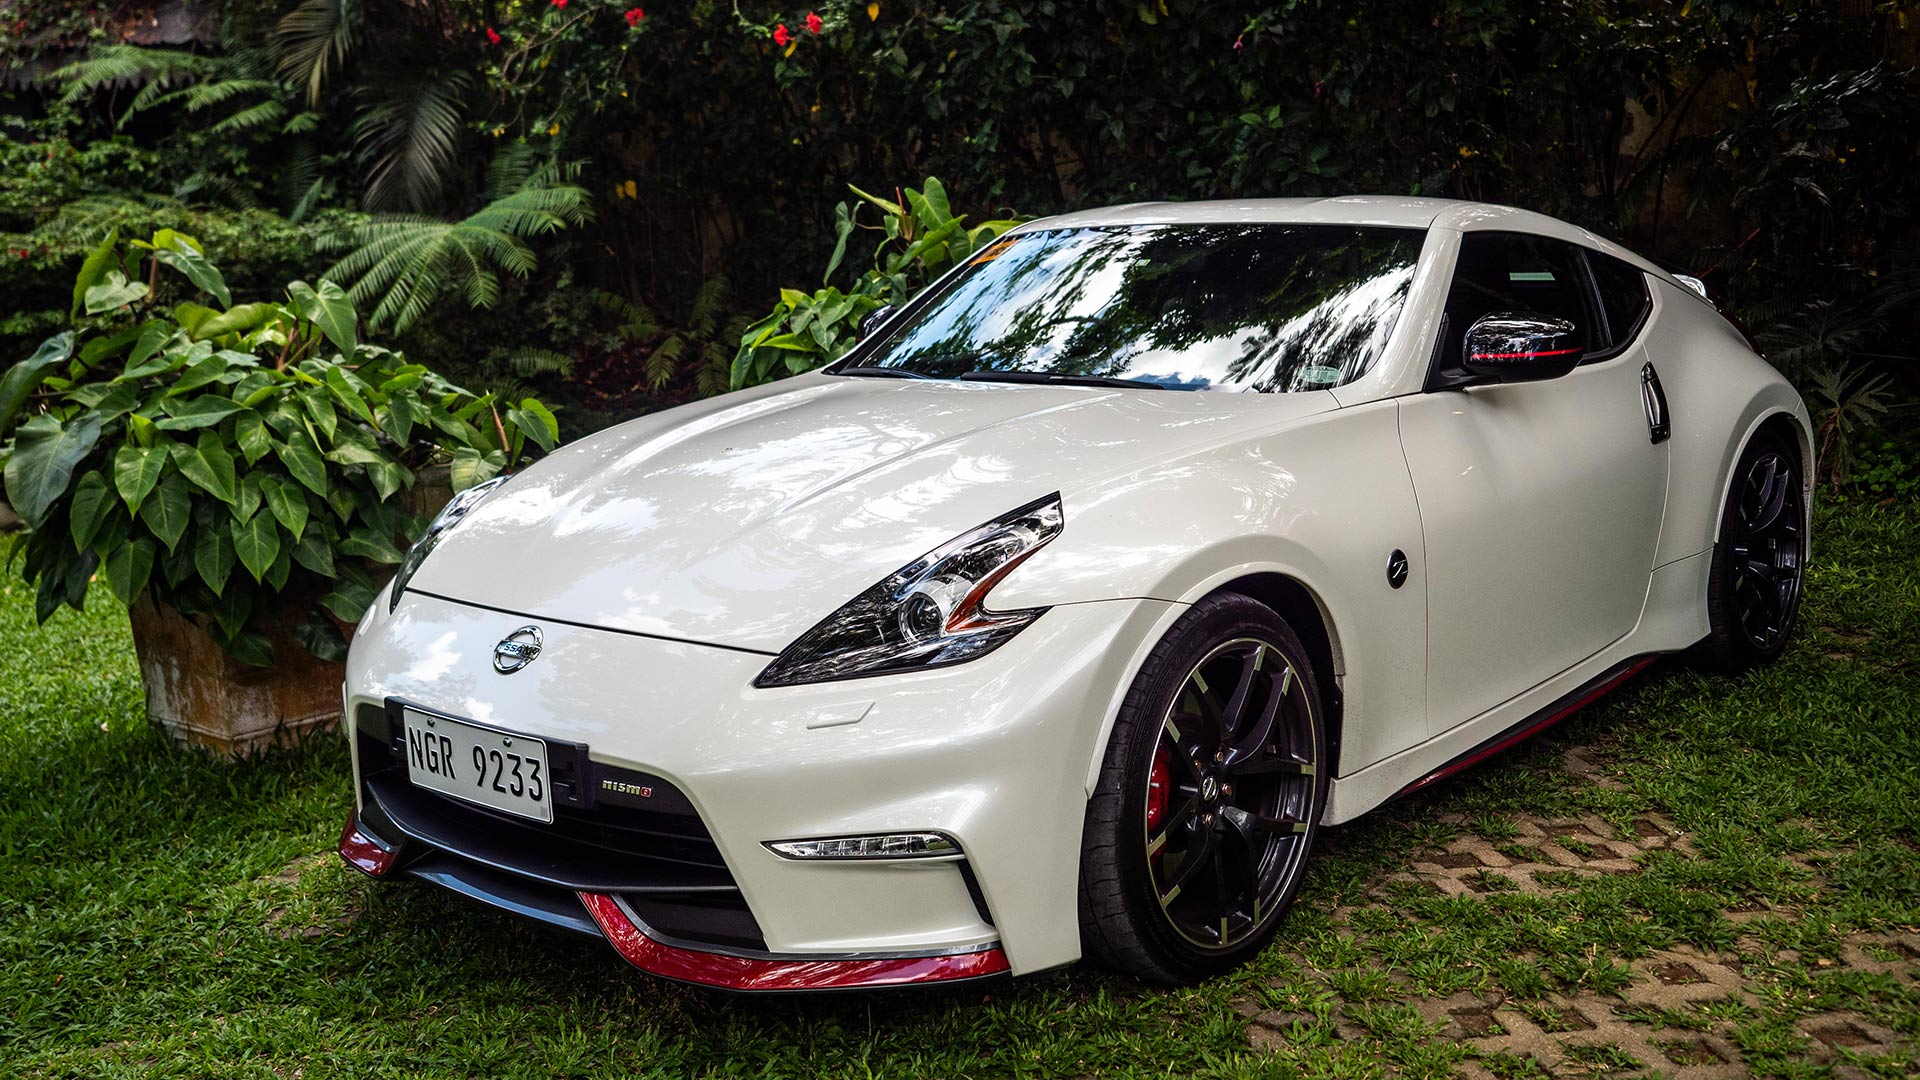 2021 Nissan 370z Nismo Review Design Engine Release Date And Price